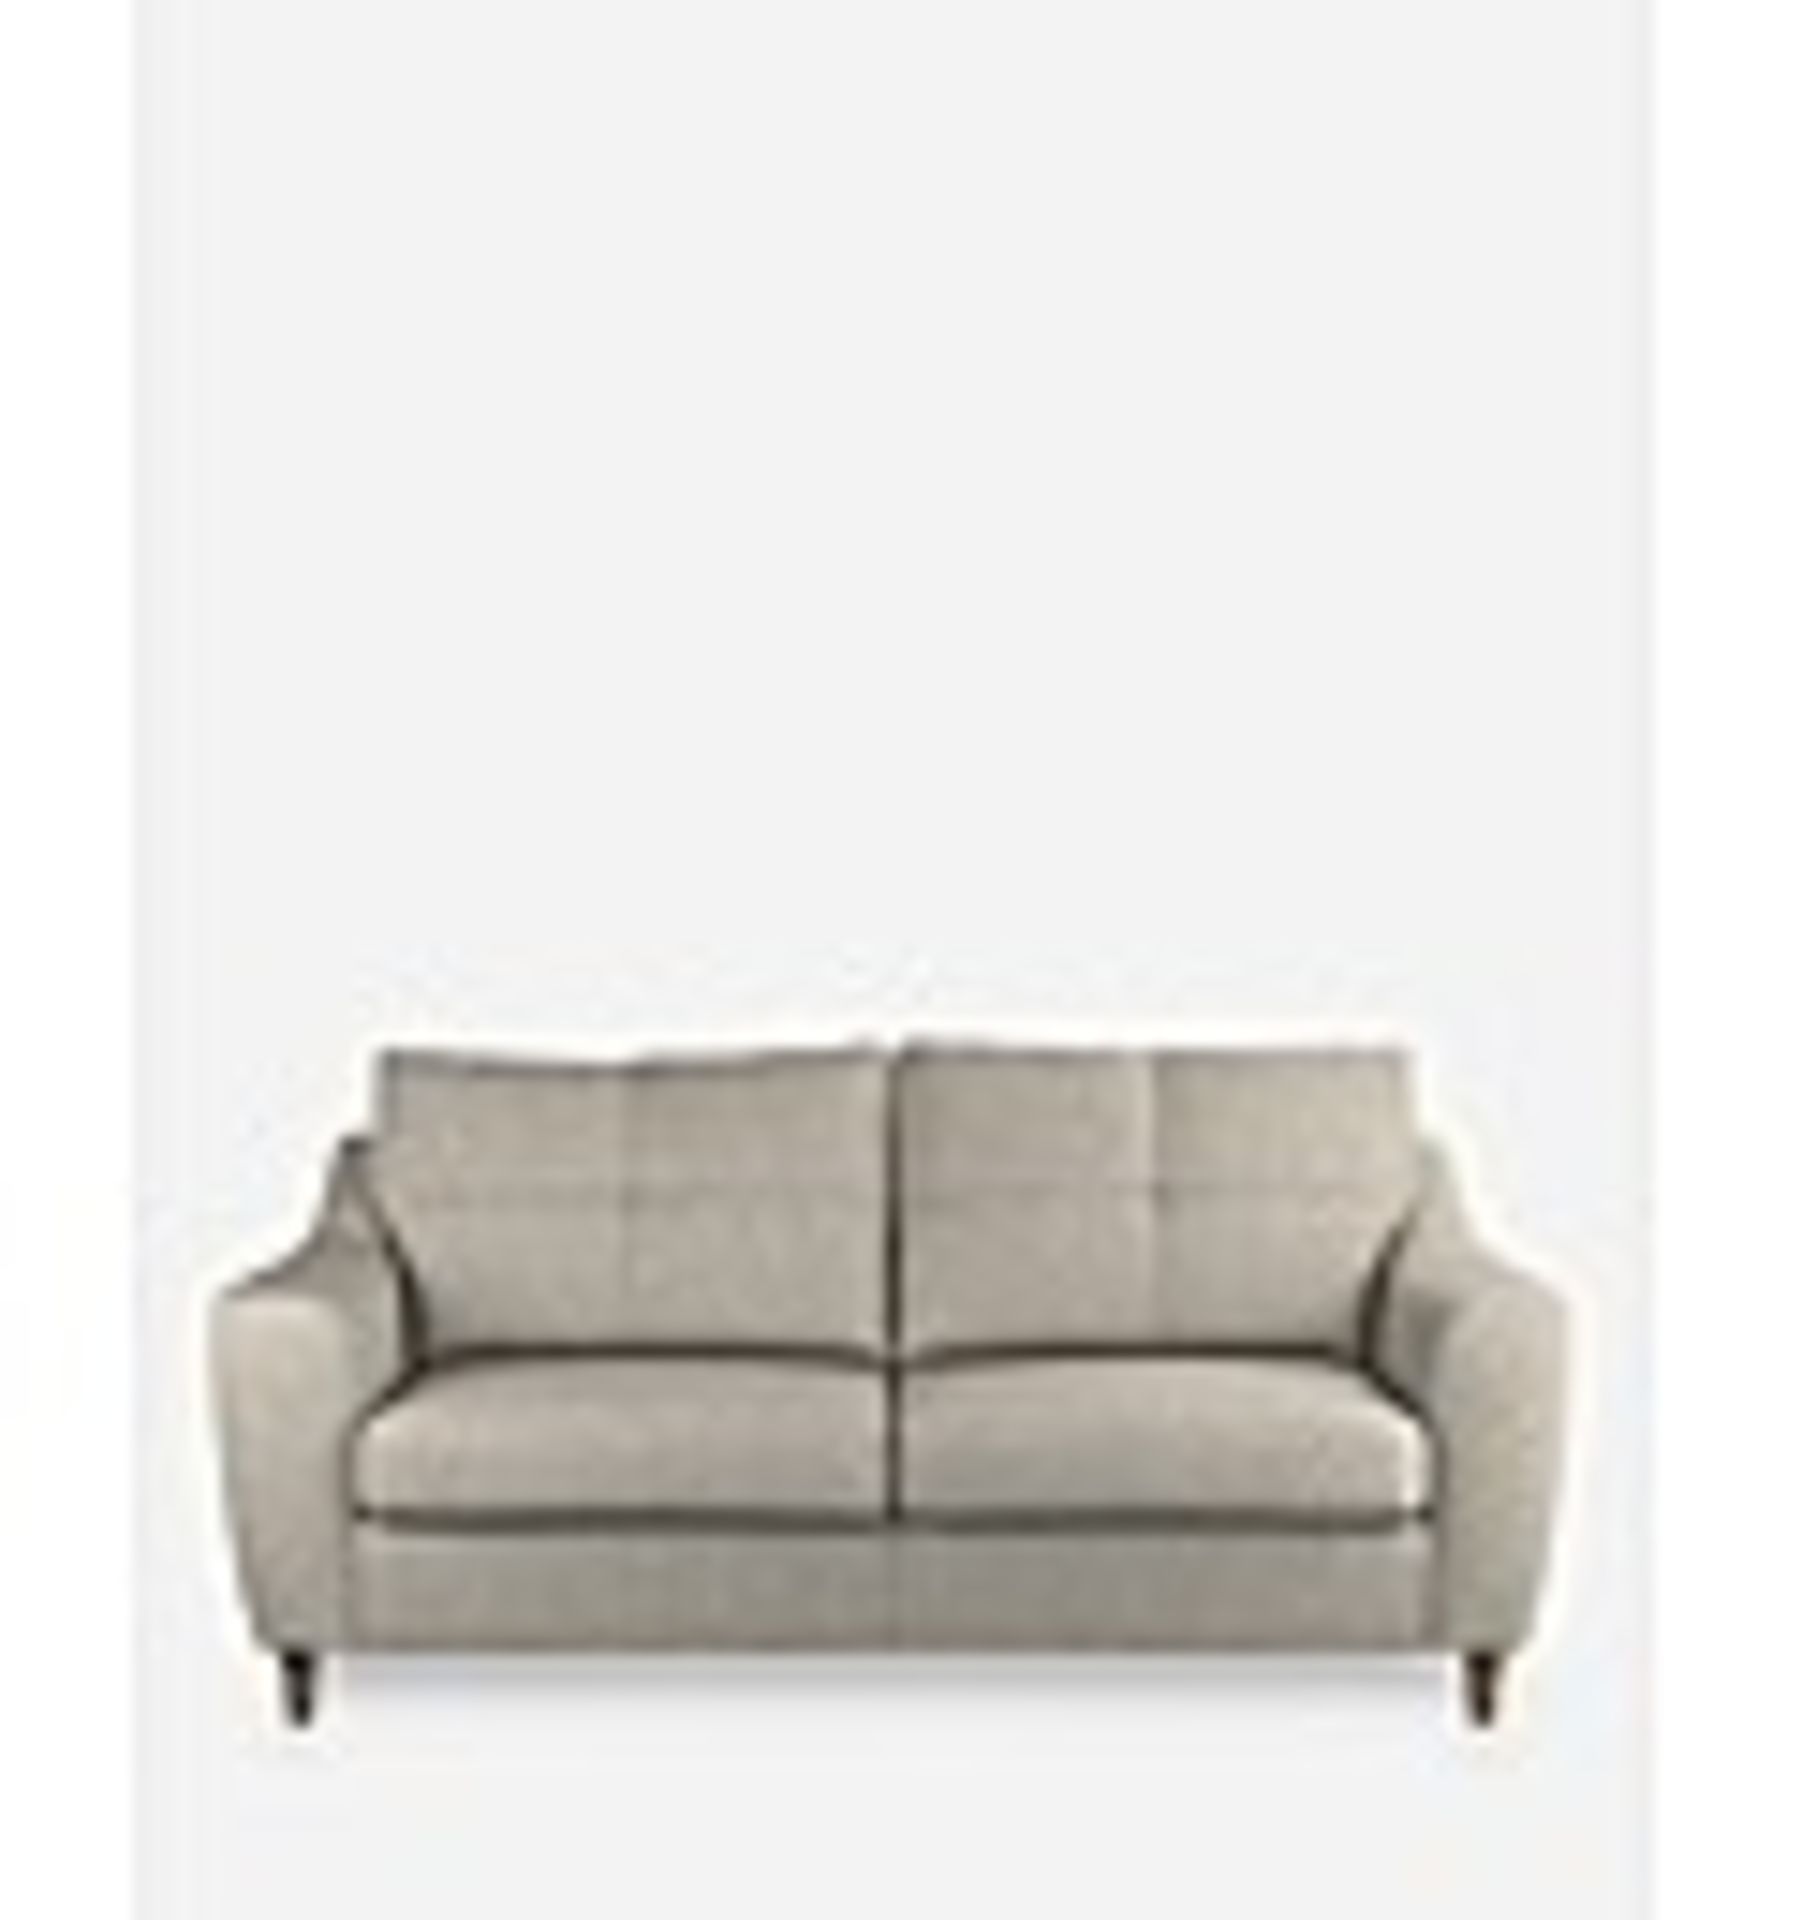 (REF118316) Baxter 3 Seater Sofa RRP 673.5